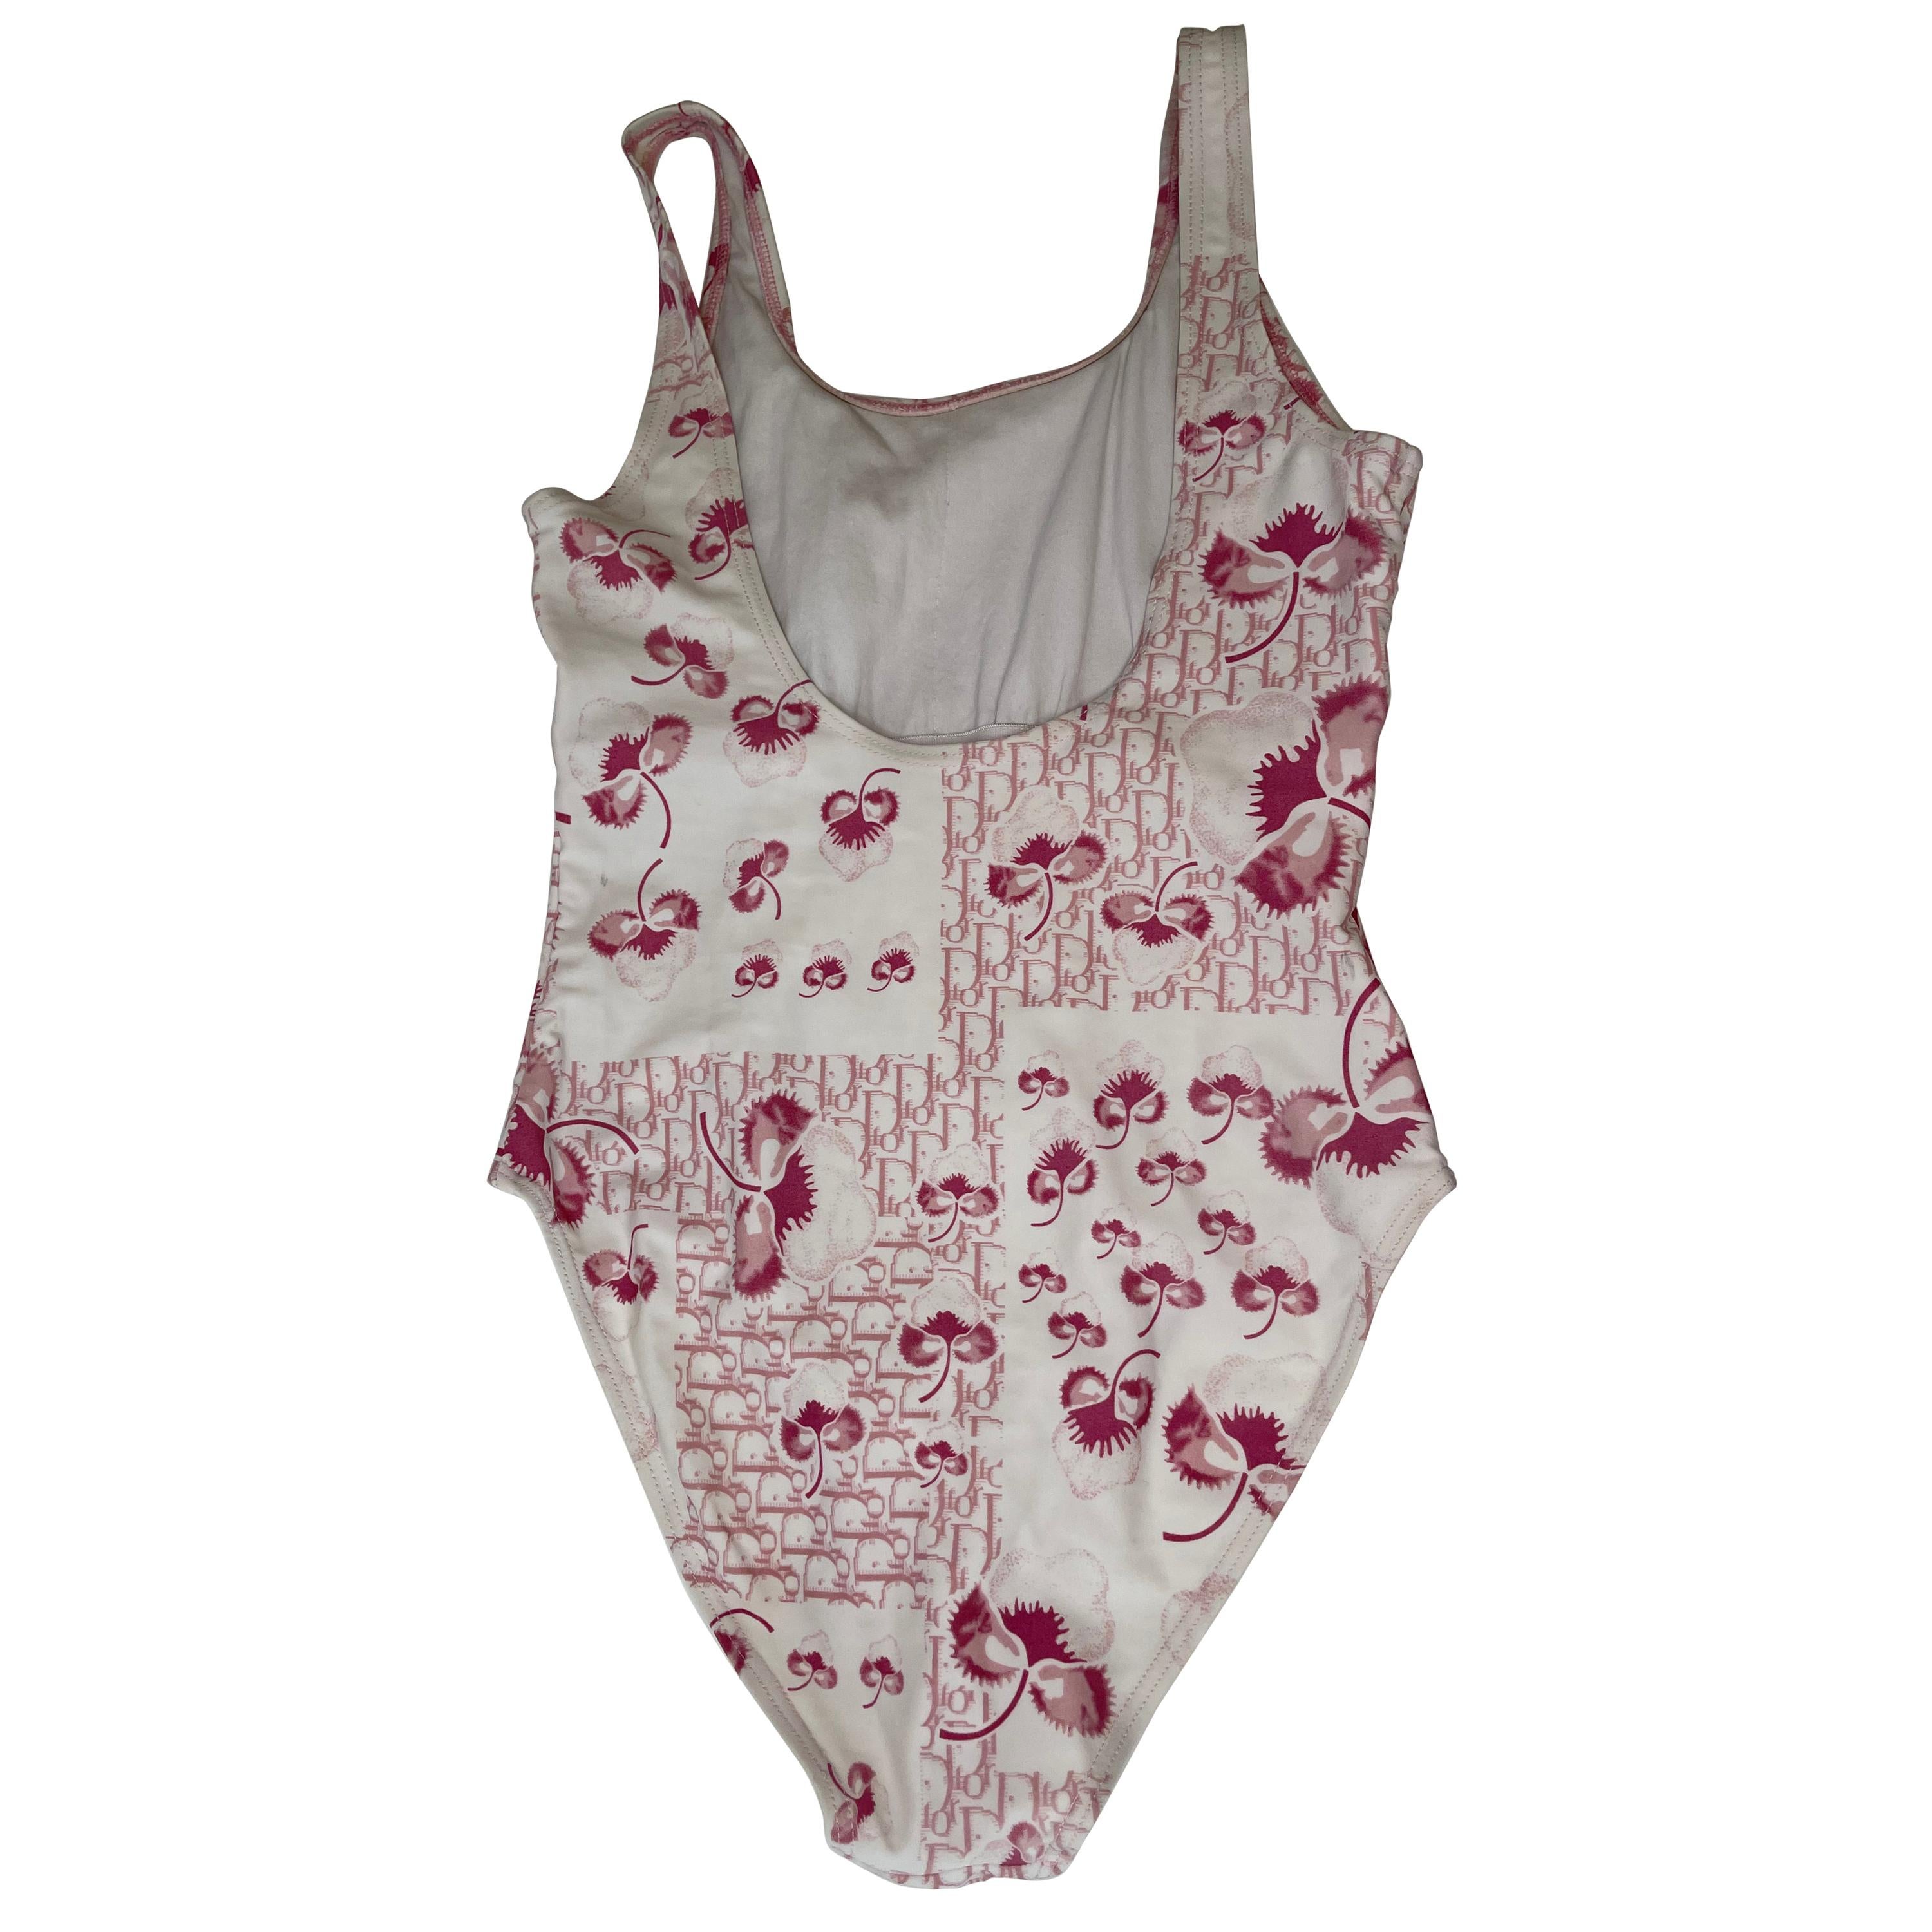  Dior Vintage Diorissimo Bathing Suit Pink One Piece XL